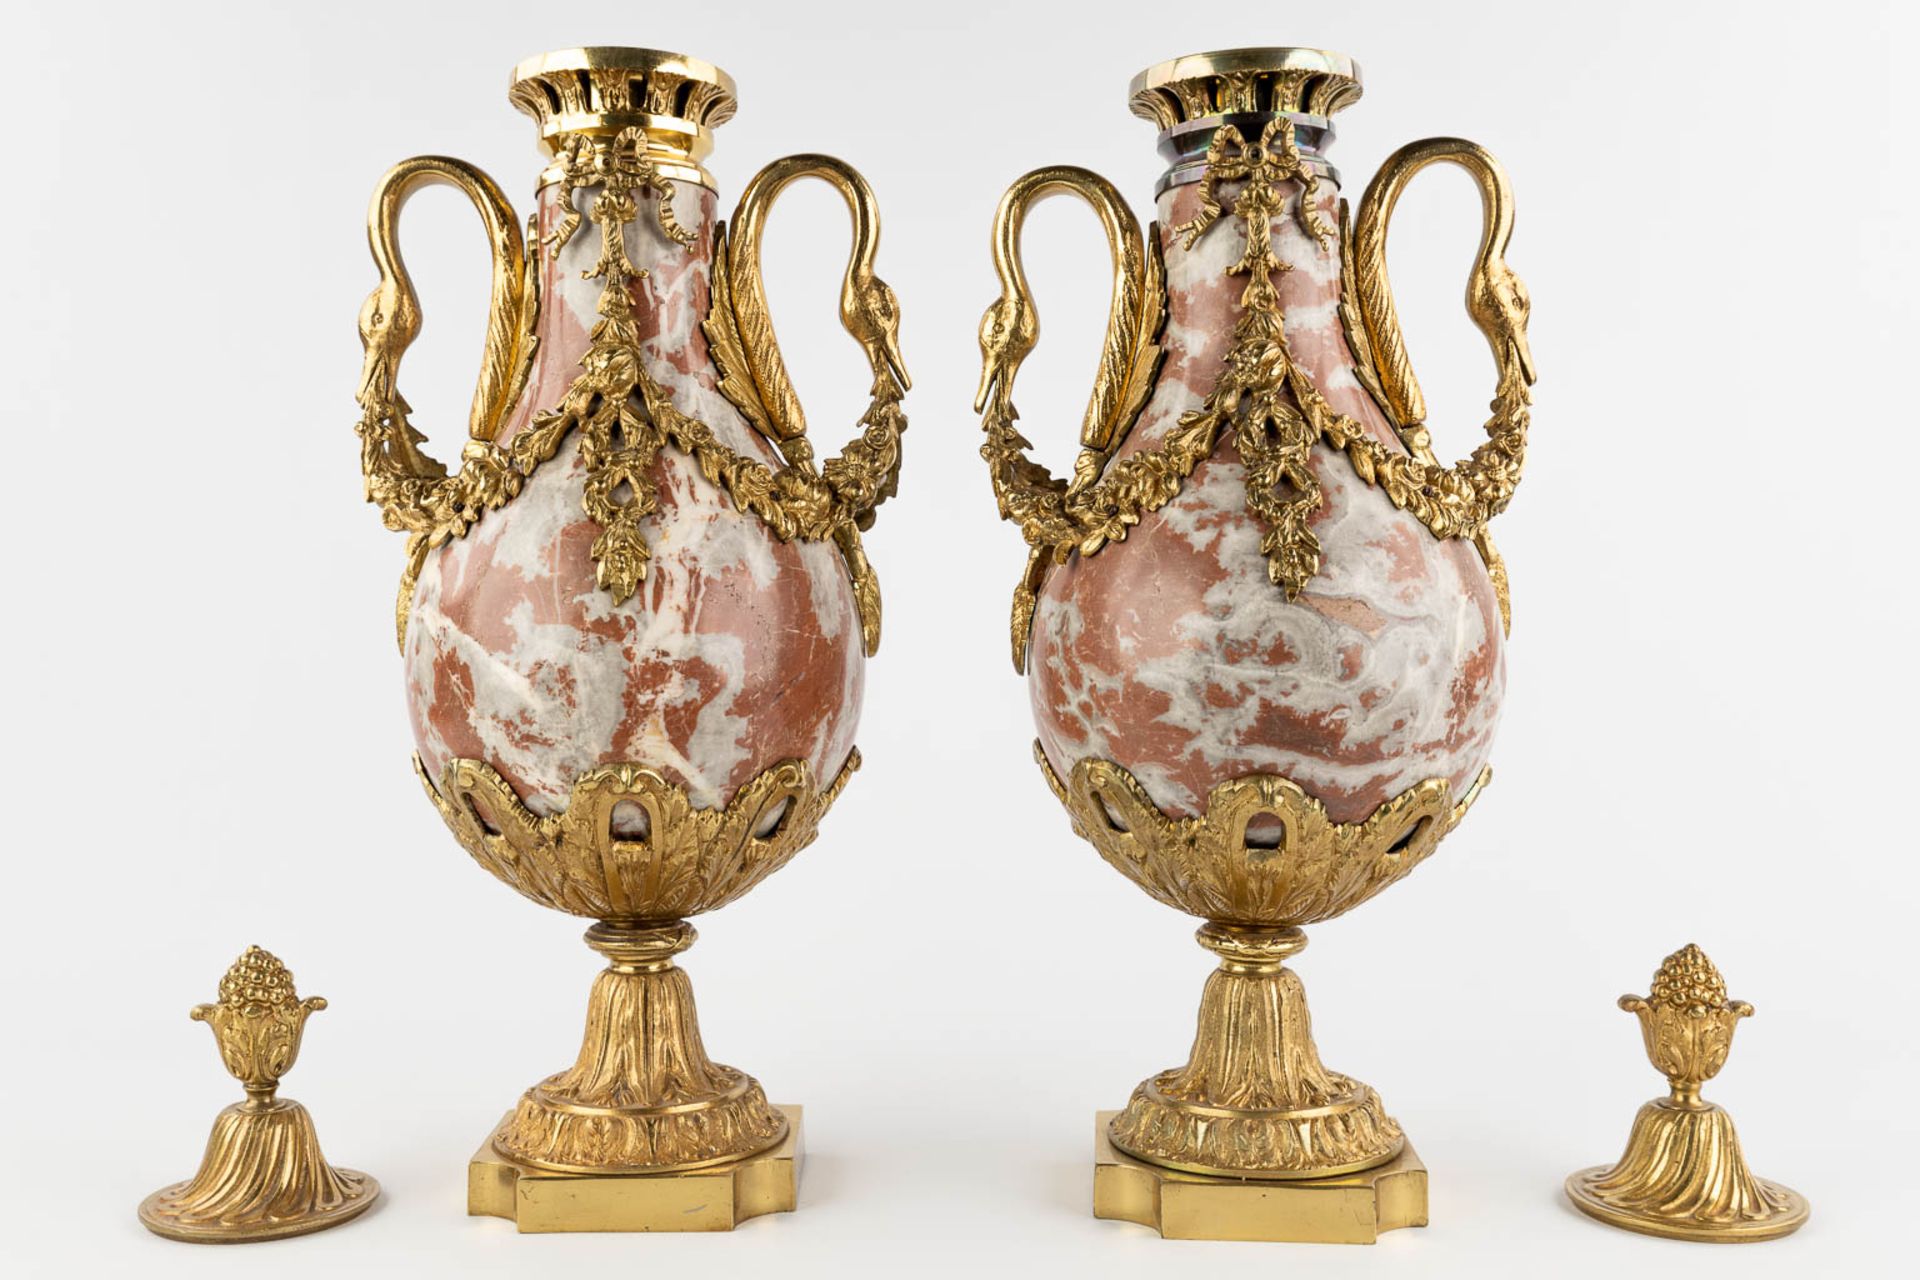 A pair of cassolettes, red and grey marble mounted with bronze in Empire style. (D:18 x W:23 x H:54  - Bild 7 aus 13